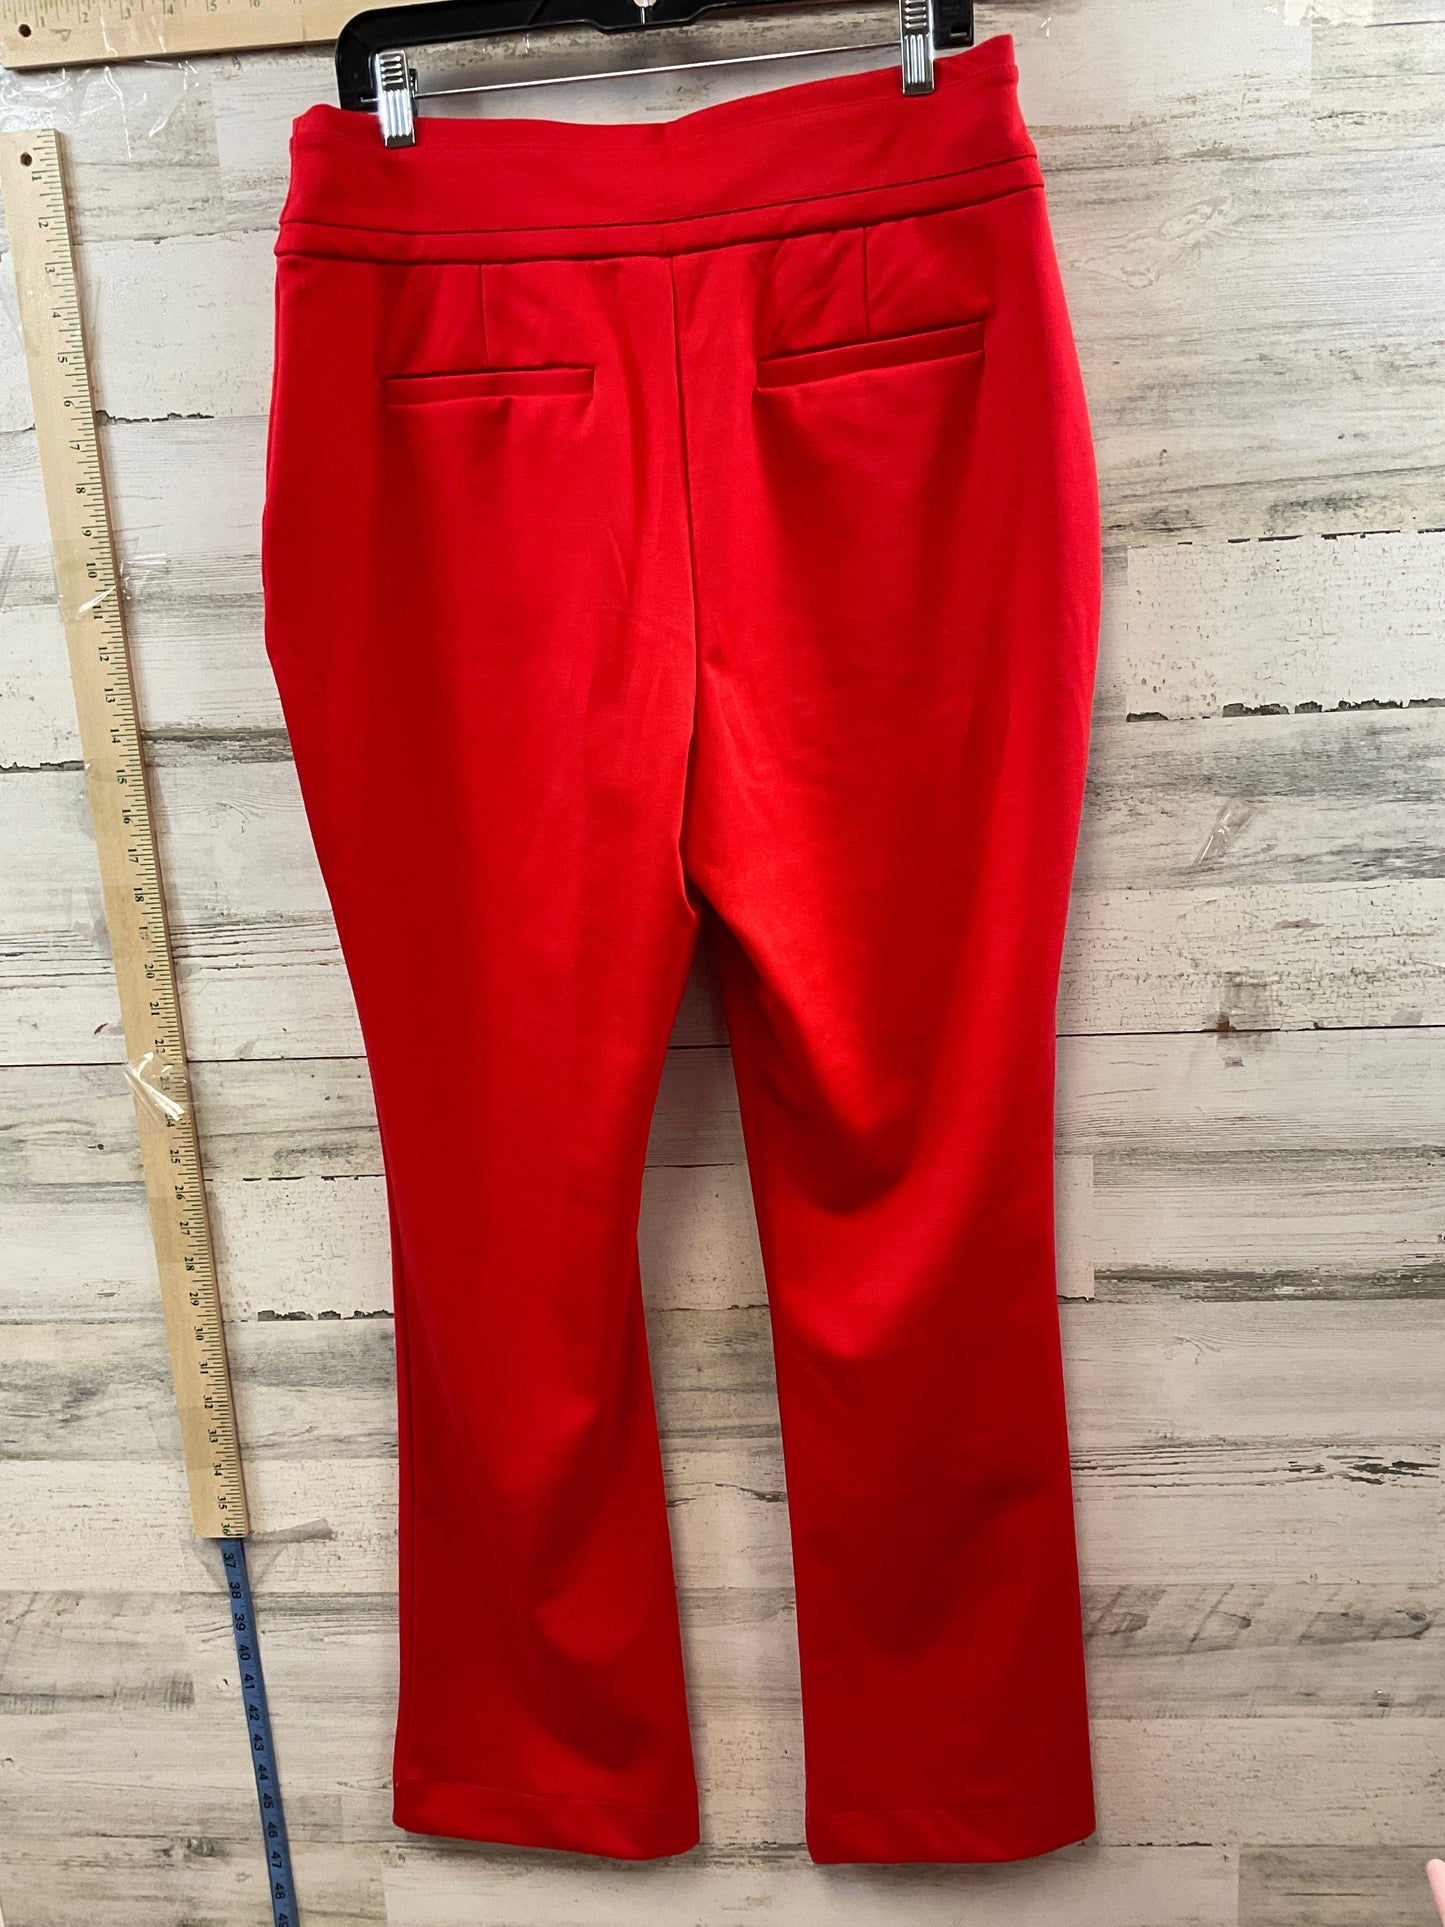 Pants Other By New York And Co  Size: L